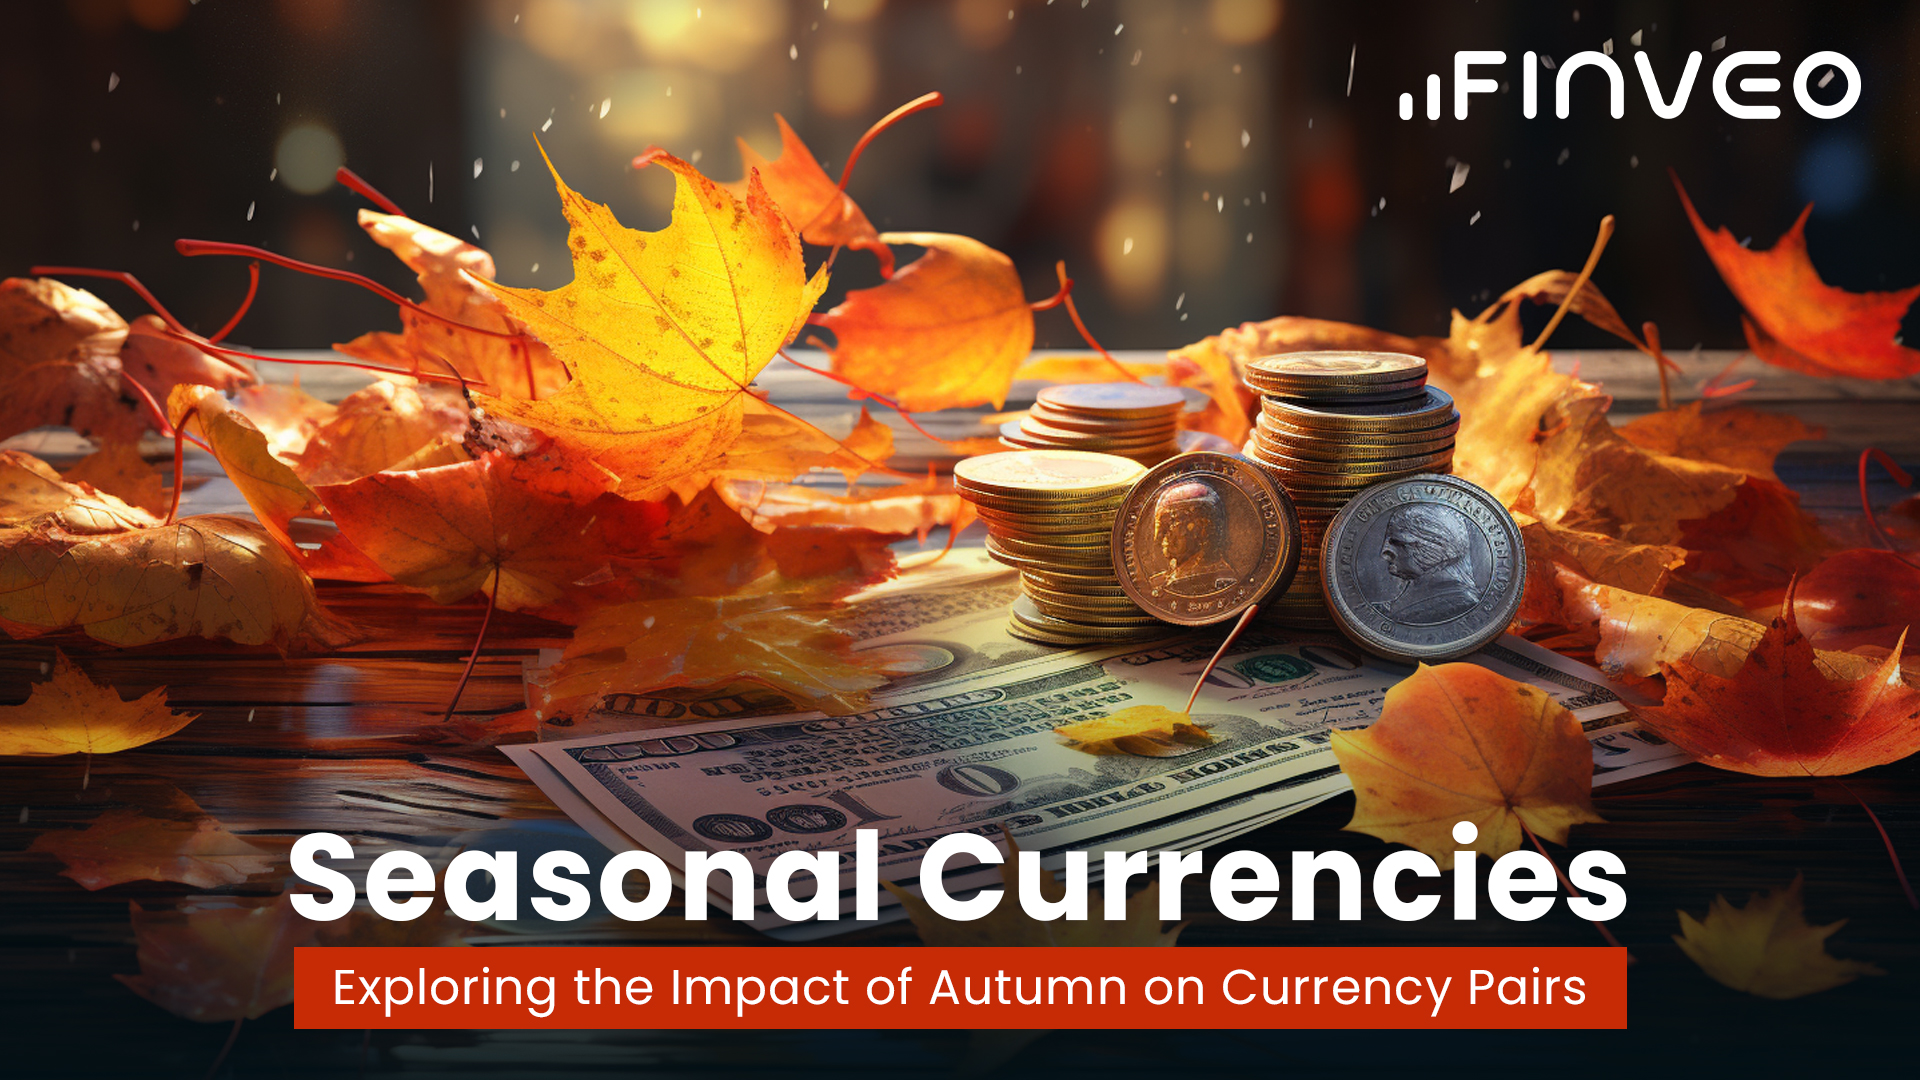 Seasonal Currencies: Exploring the Impact of Autumn on Currency Pairs